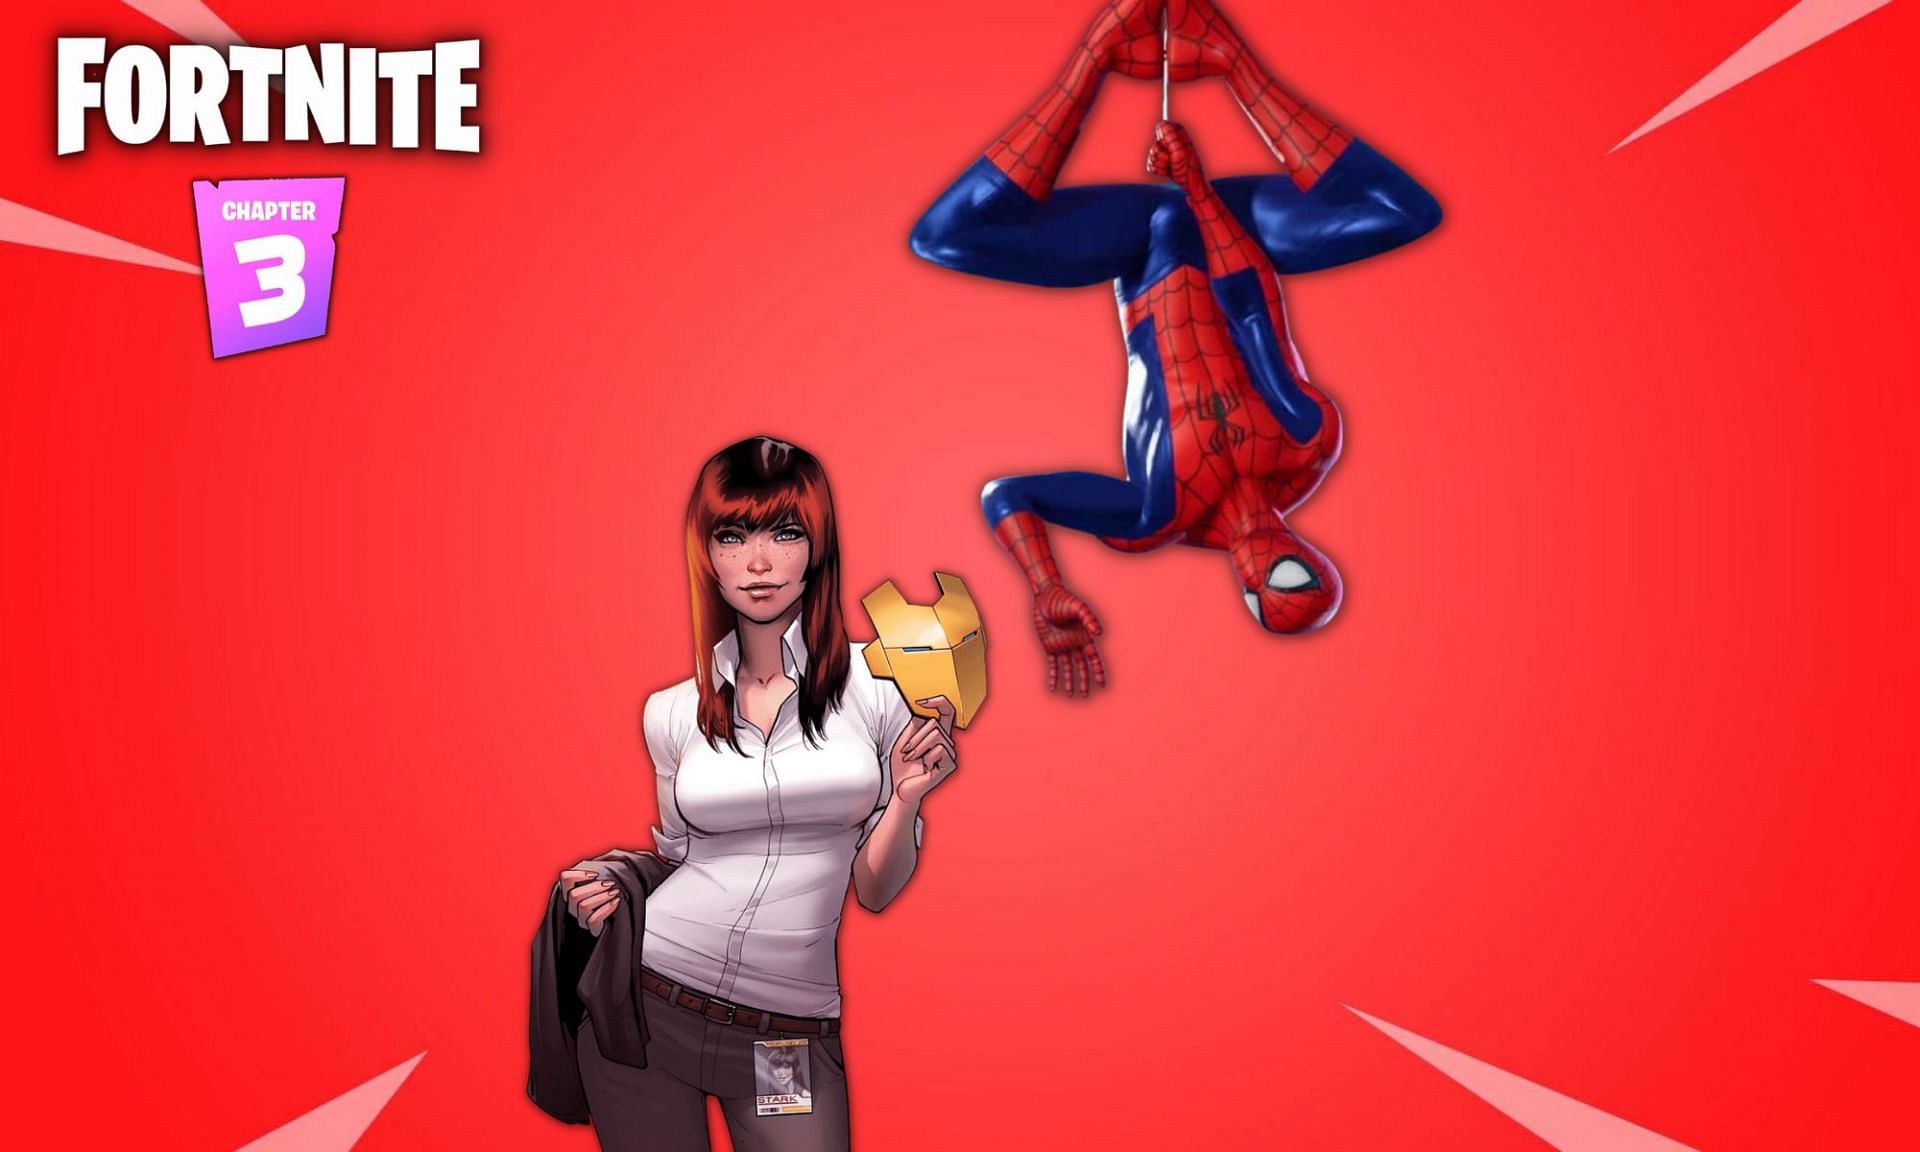 Mary Jane could open the doorway to the Spiderverse in Fortnite Chapter 3 (Image via Sportskeeda)